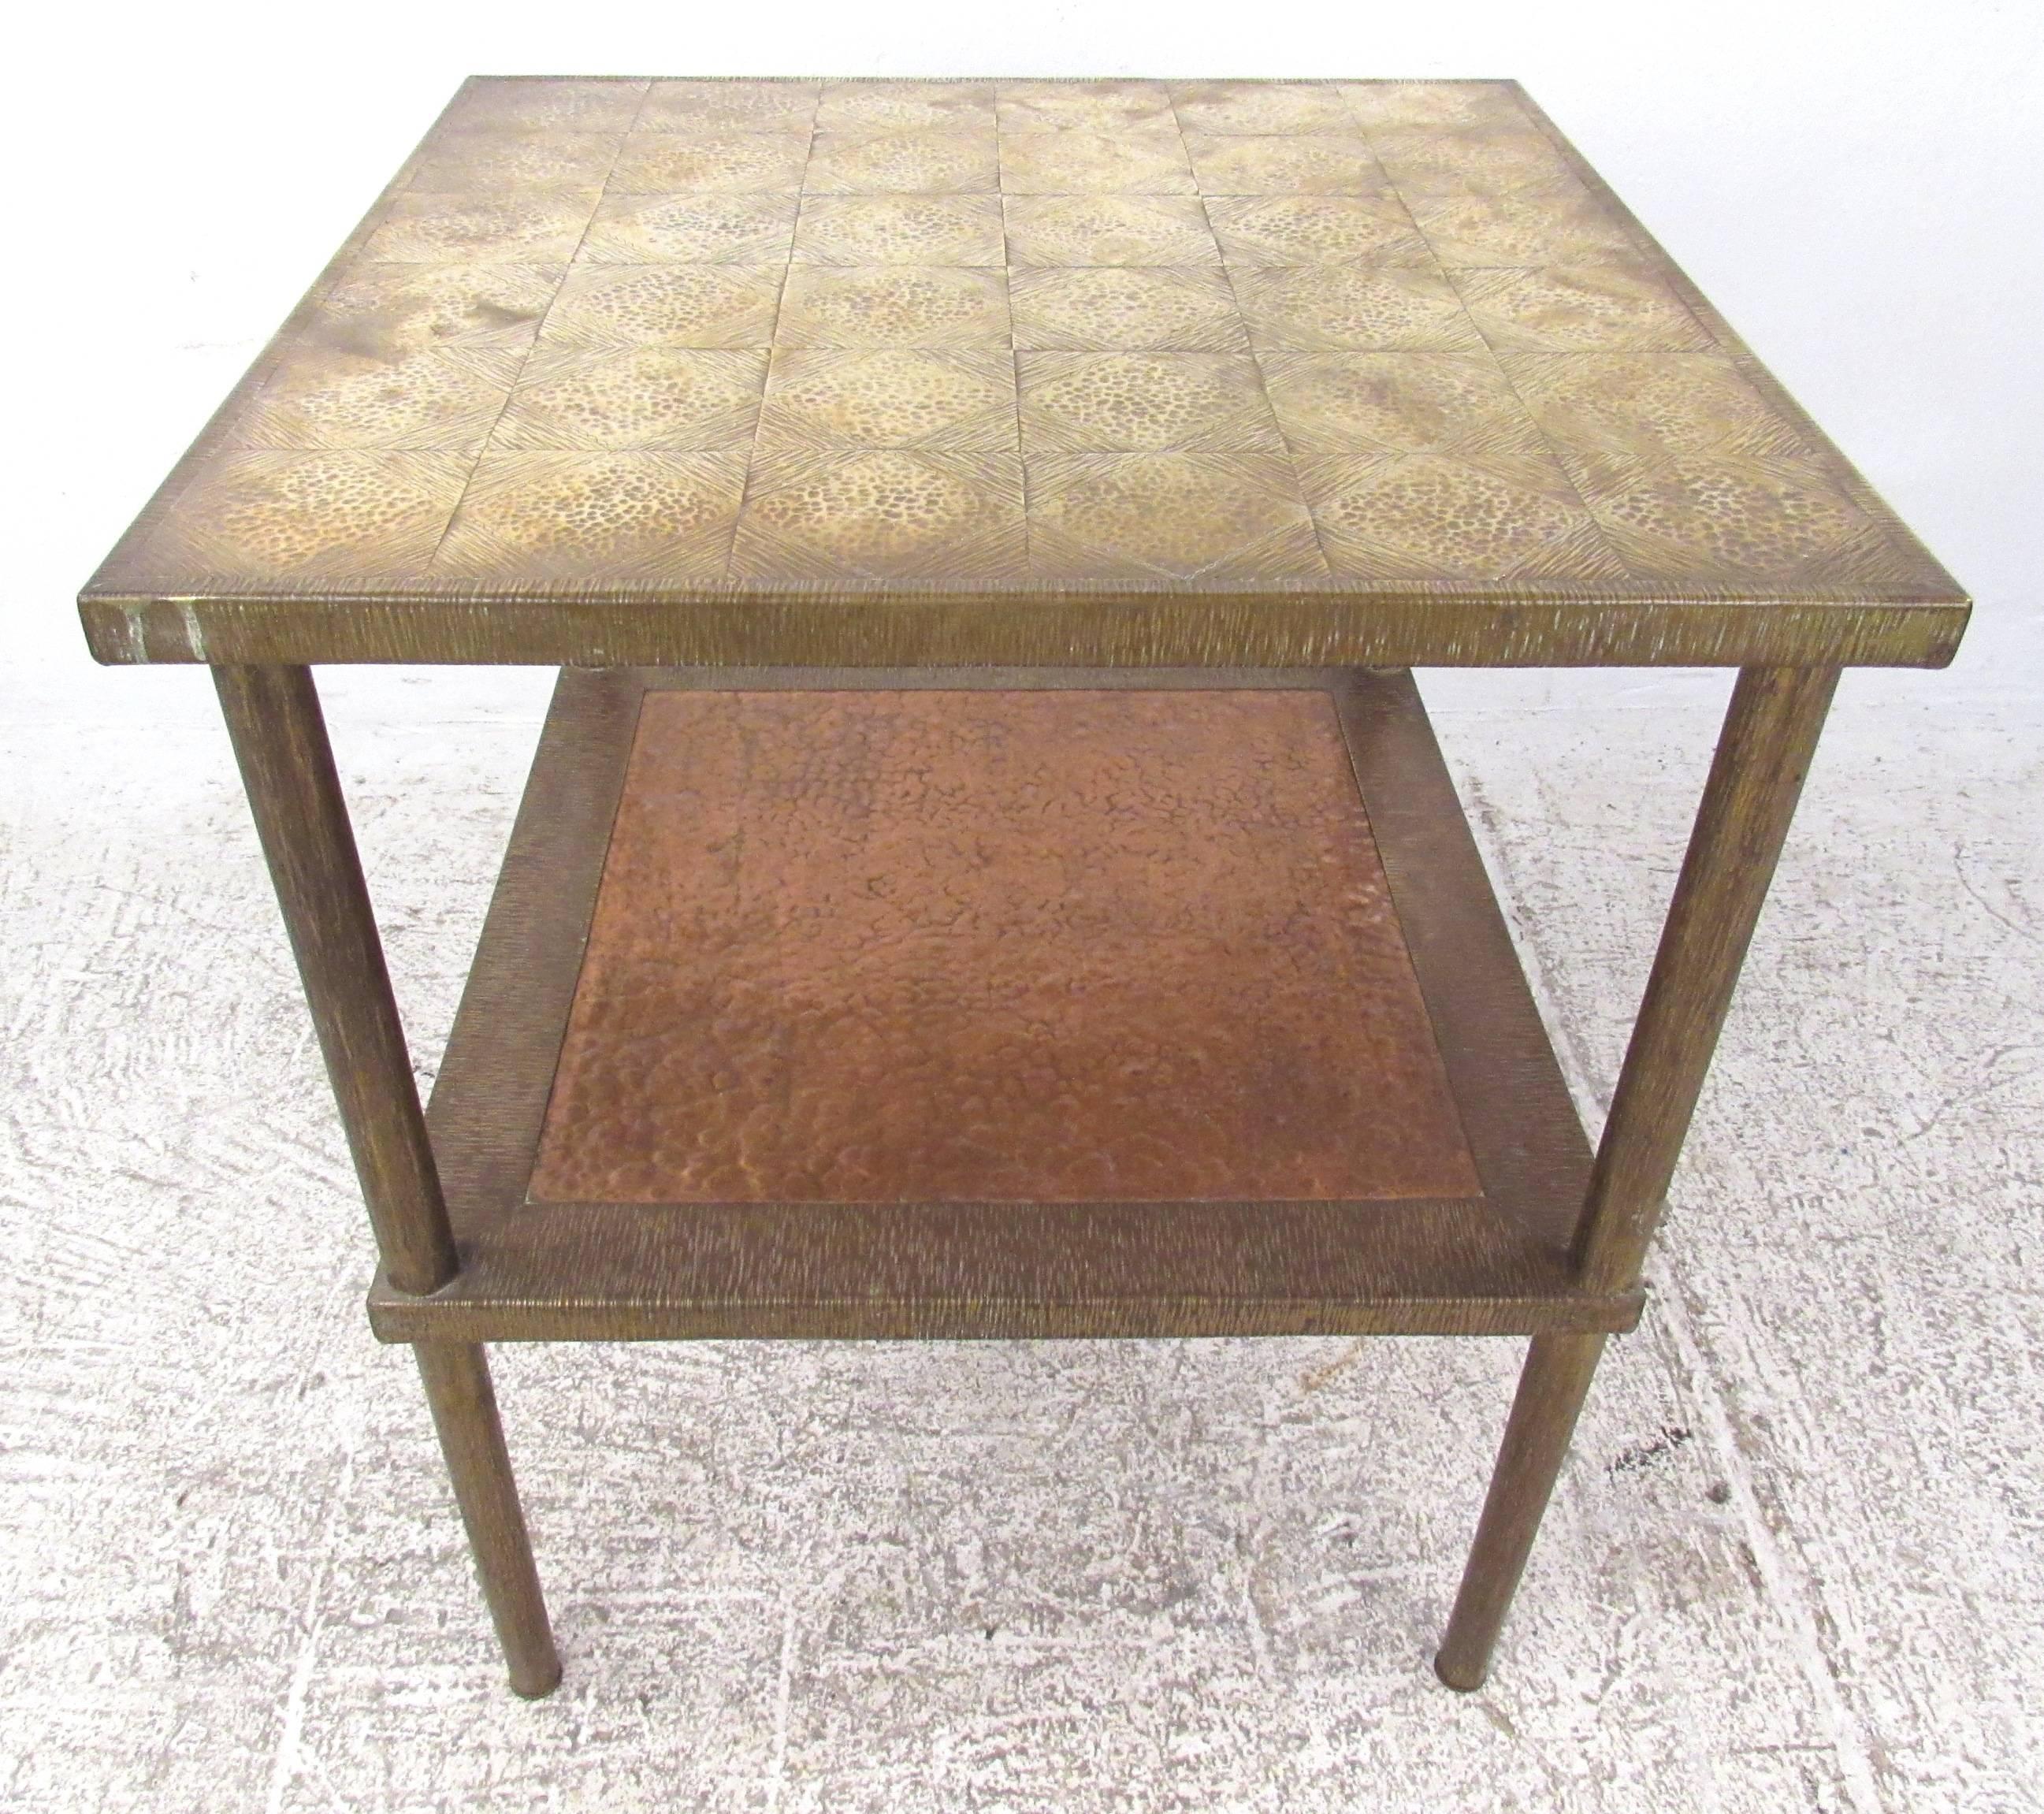 Stunning Mid-Century two-tier occasional table features unique textured brass top with an embossed diamond pattern. This vintage end table makes an impressive addition to any interior. Please confirm location with dealer (NY or NJ).